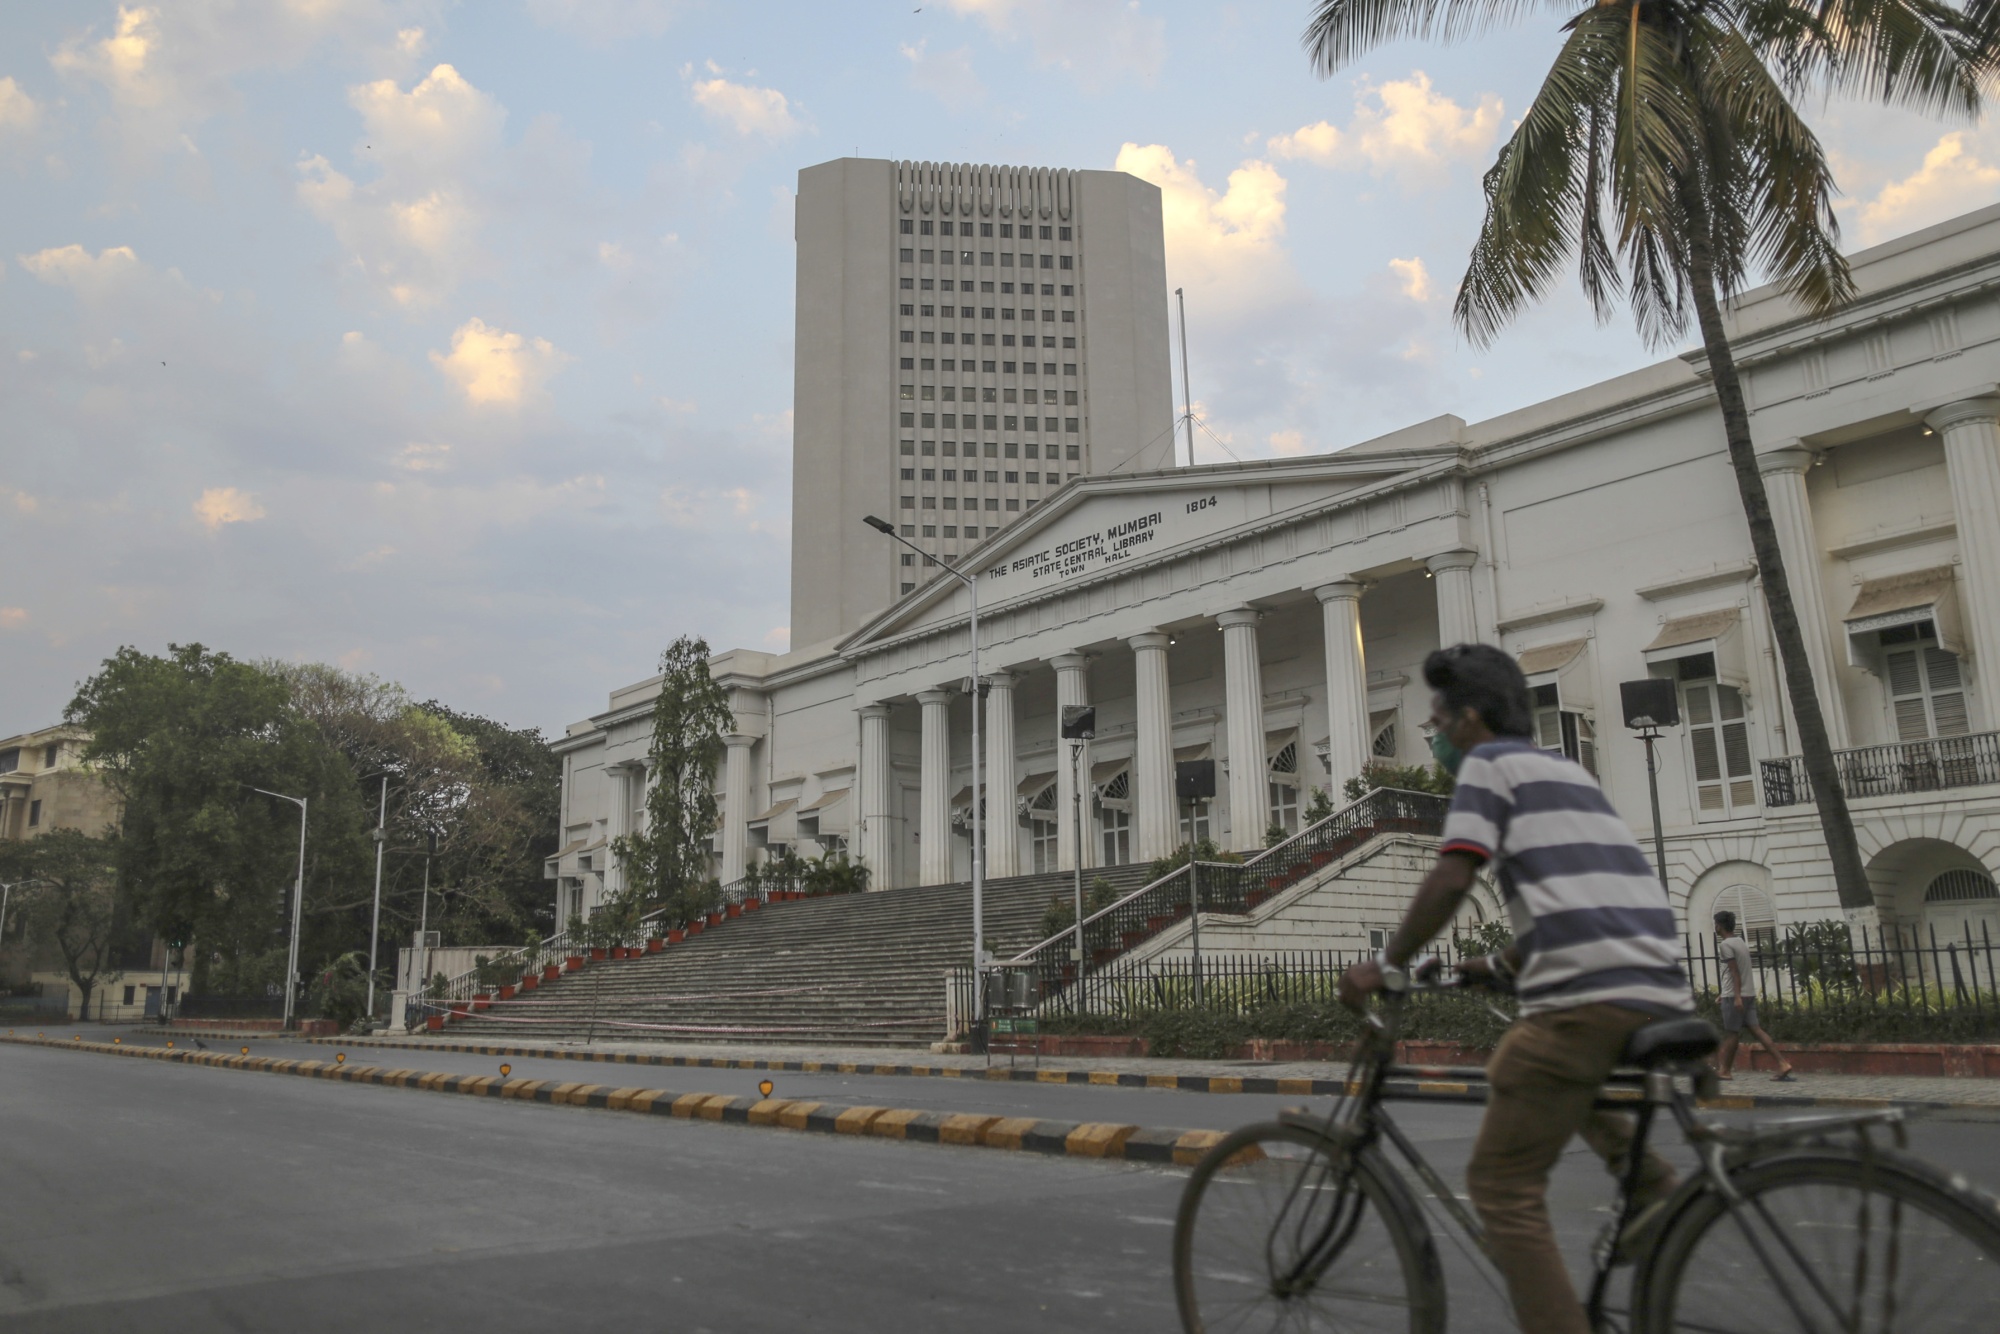 The Reserve Bank of India (RBI) headquarters in Mumbai on March 25.